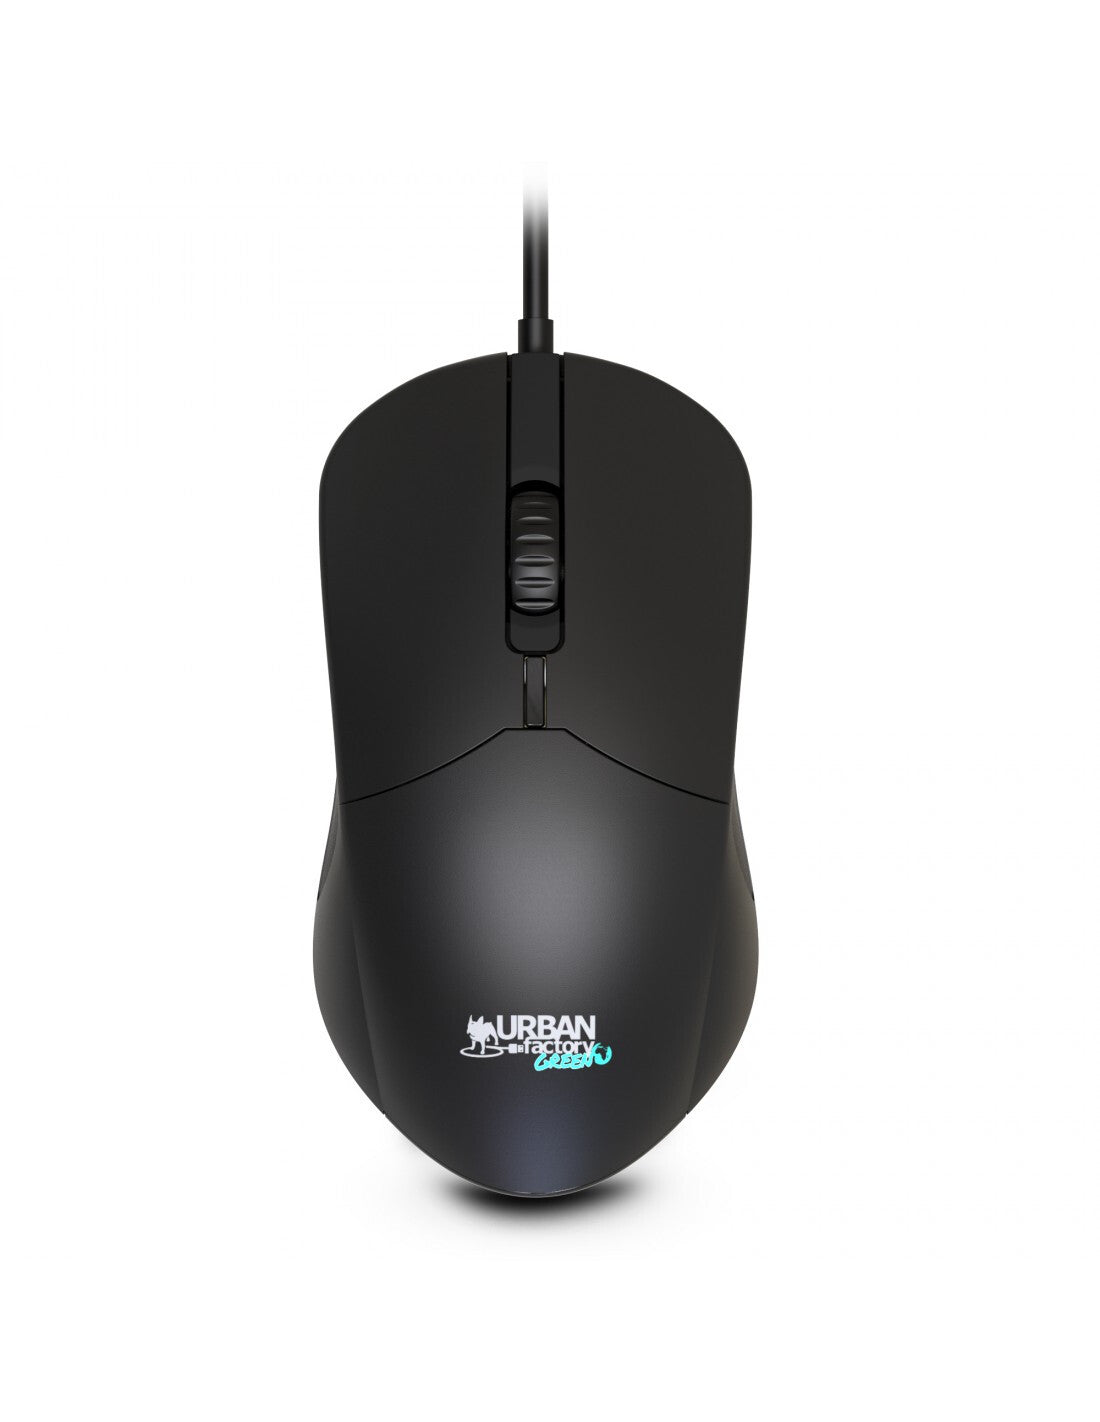 Urban Factory Cyclee - Wired USB Type-A Optical Mouse in Black - 1,200 DPI